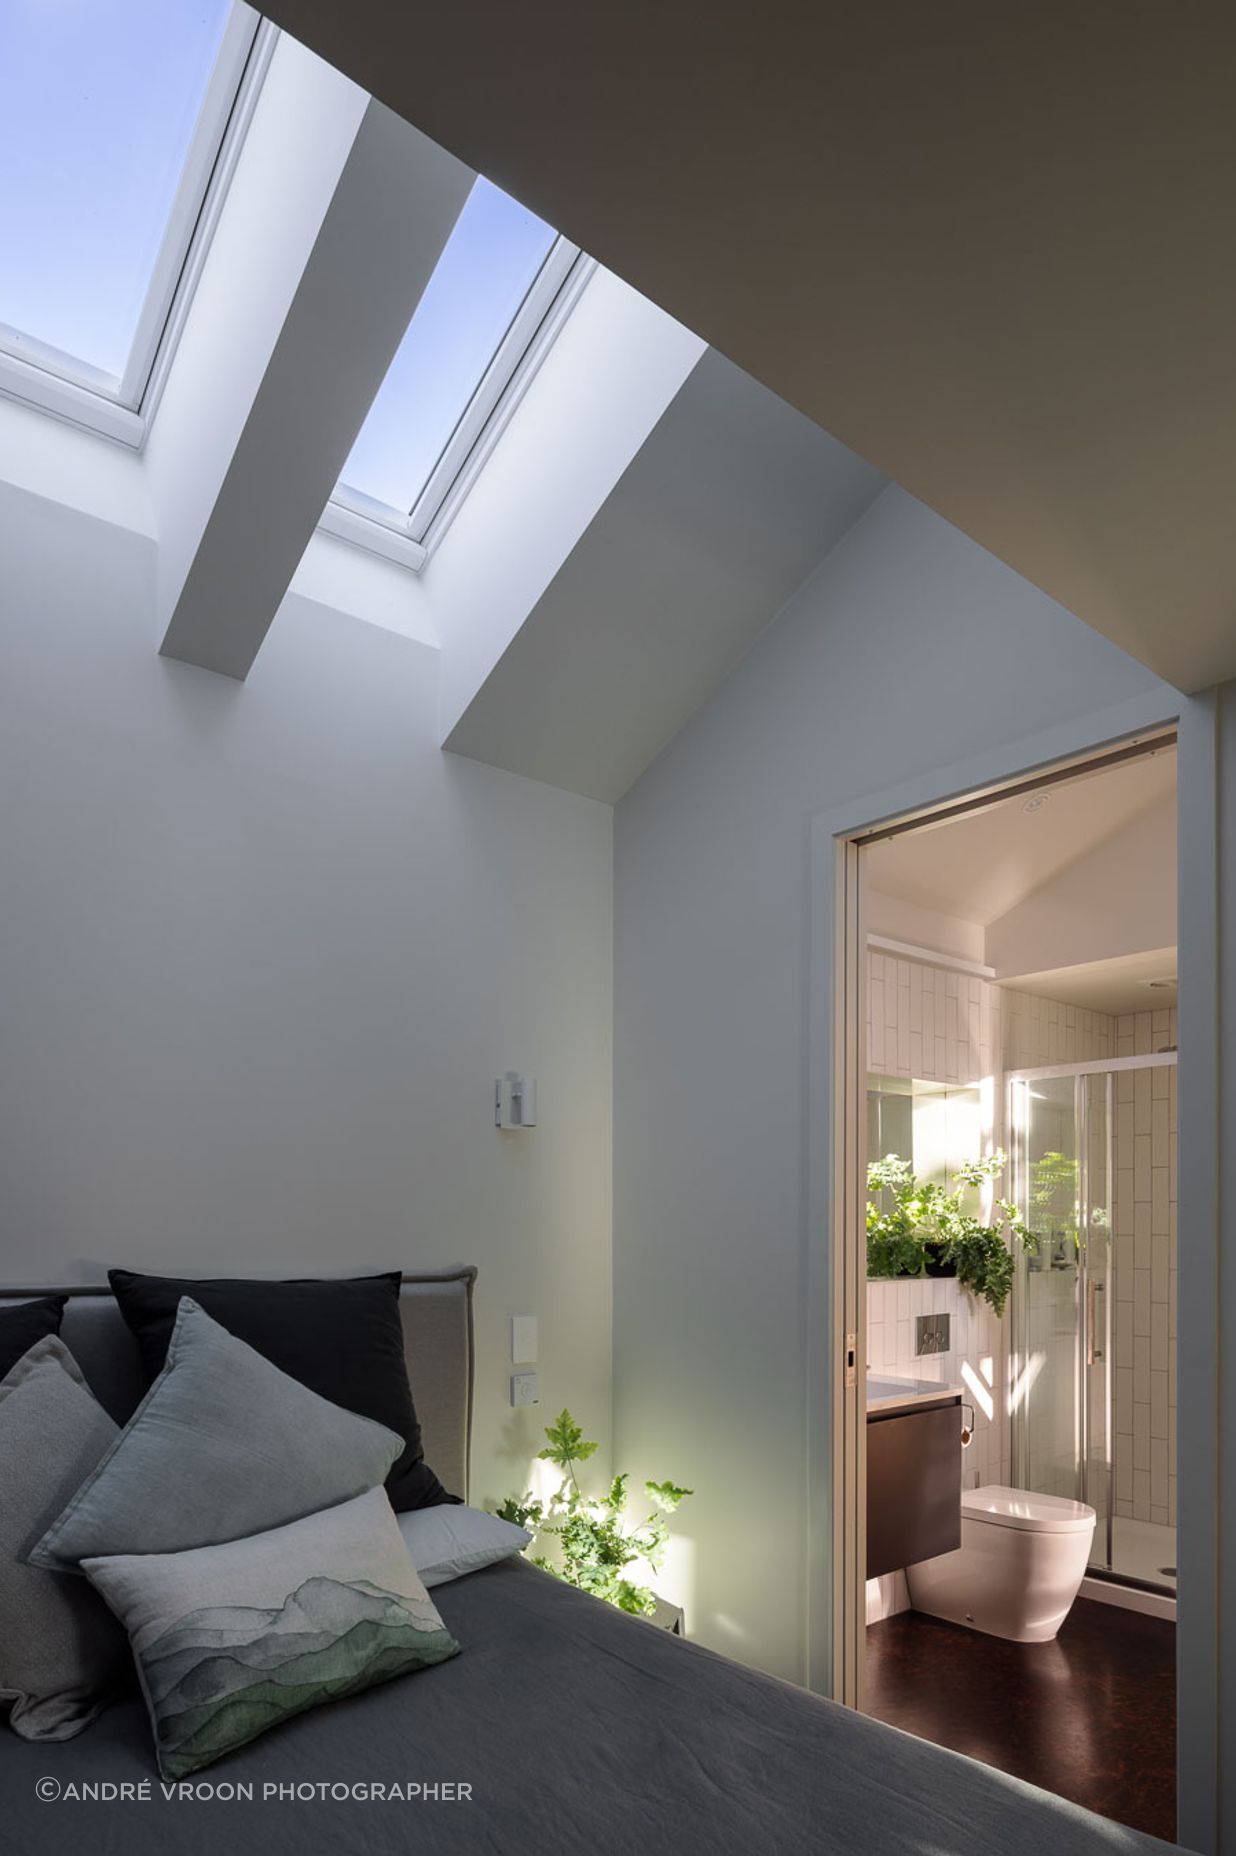 In the ground floor bedroom, skylights allow light in without impacting privacy.